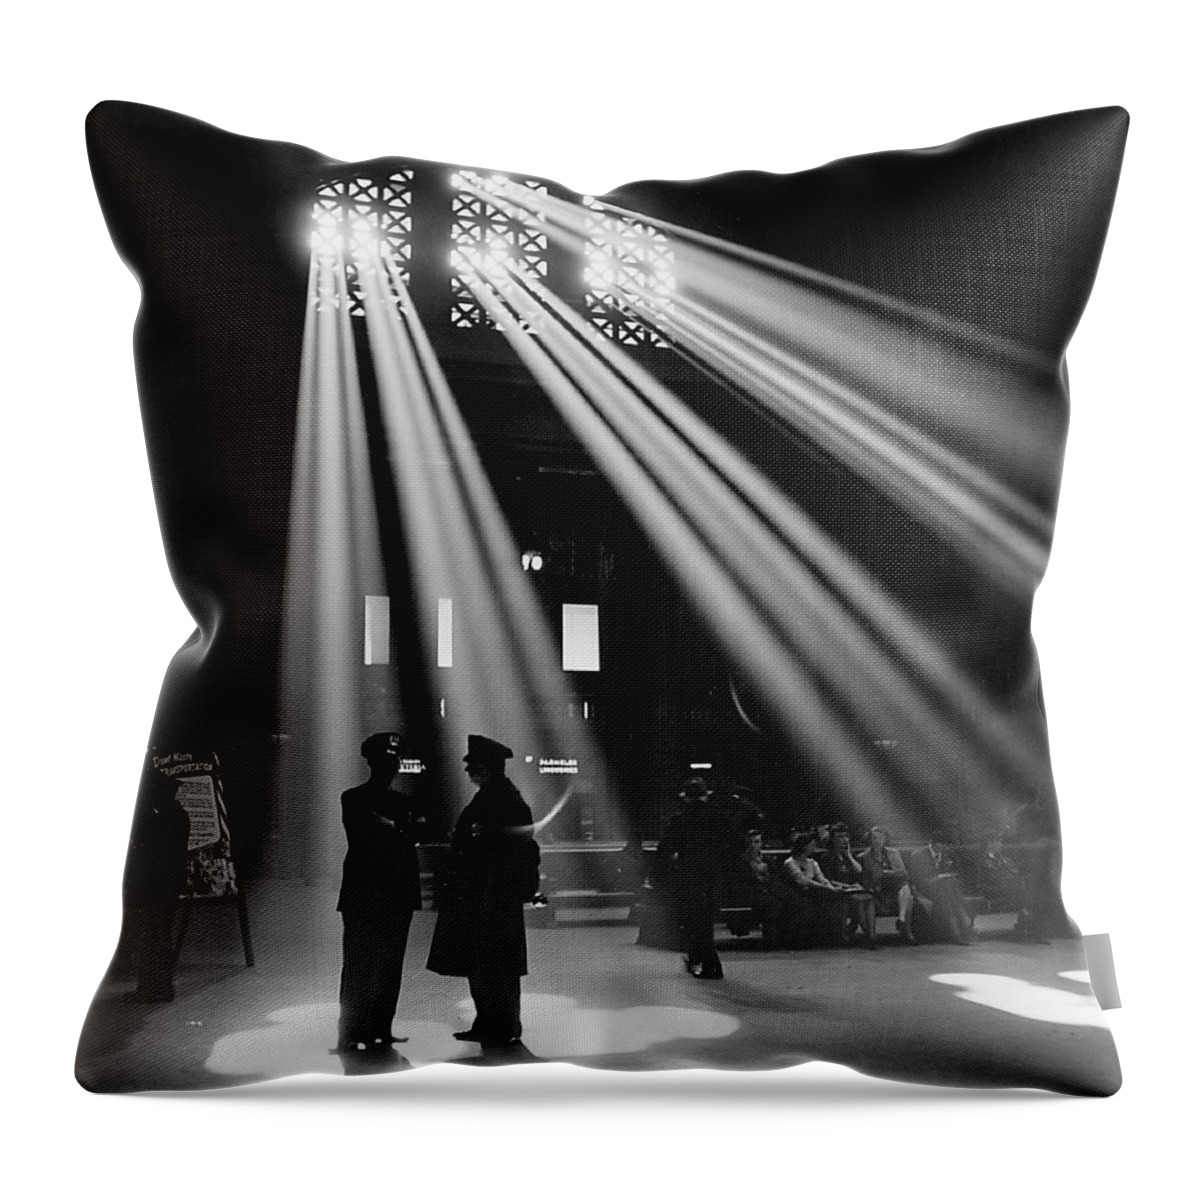 Jack Delano Throw Pillow featuring the digital art Union Station Chicago by Jack Delano